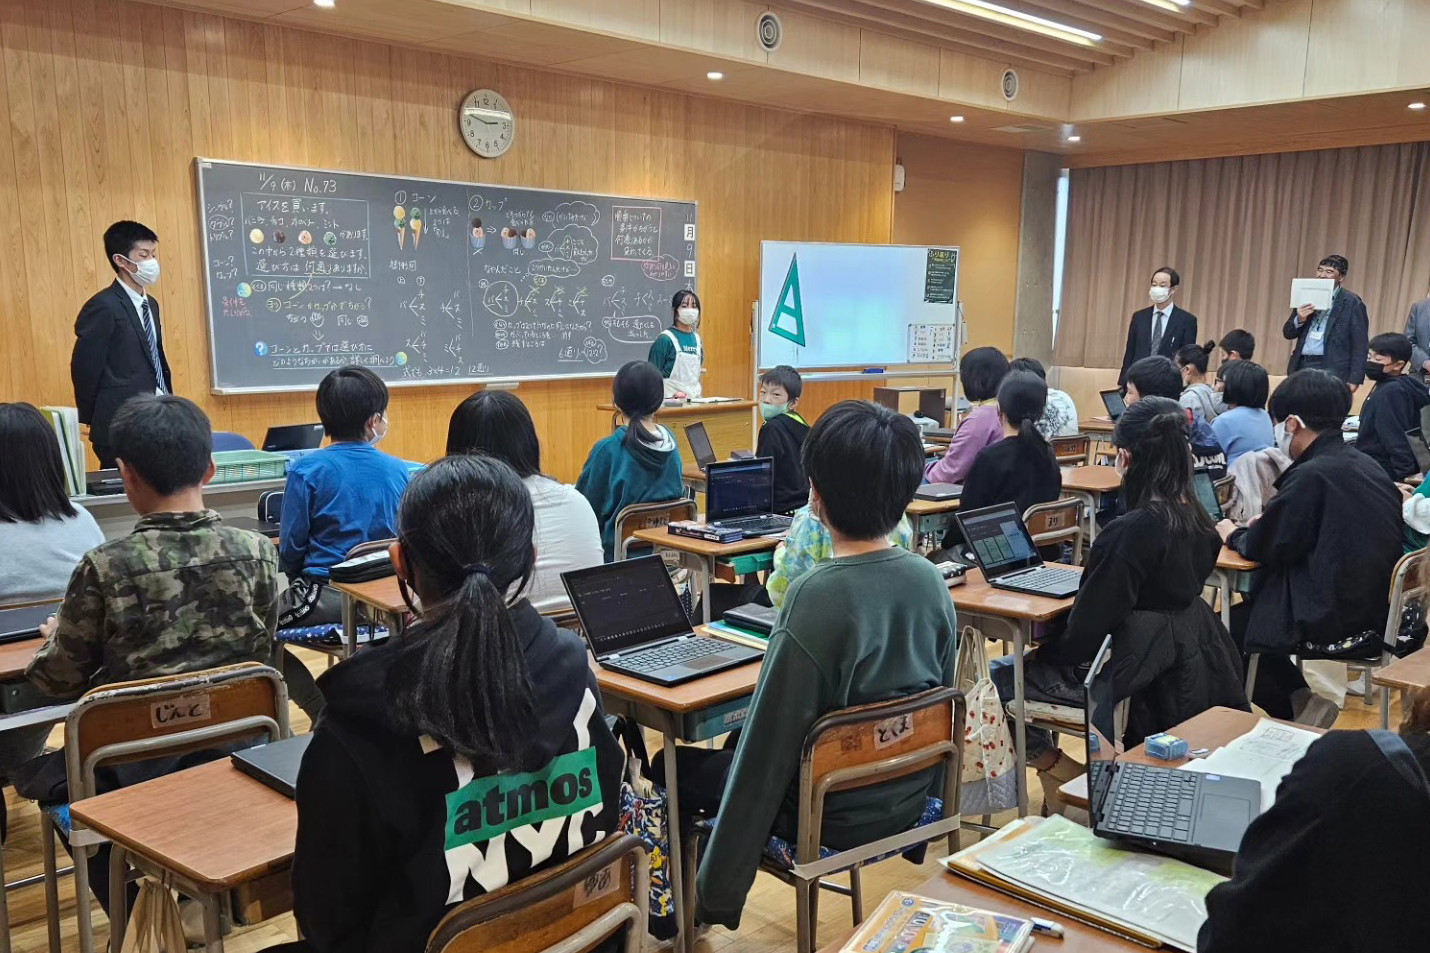 A classroom with Japanese students at desks, some with laptops, facing teachers near blackboards covered in writing.